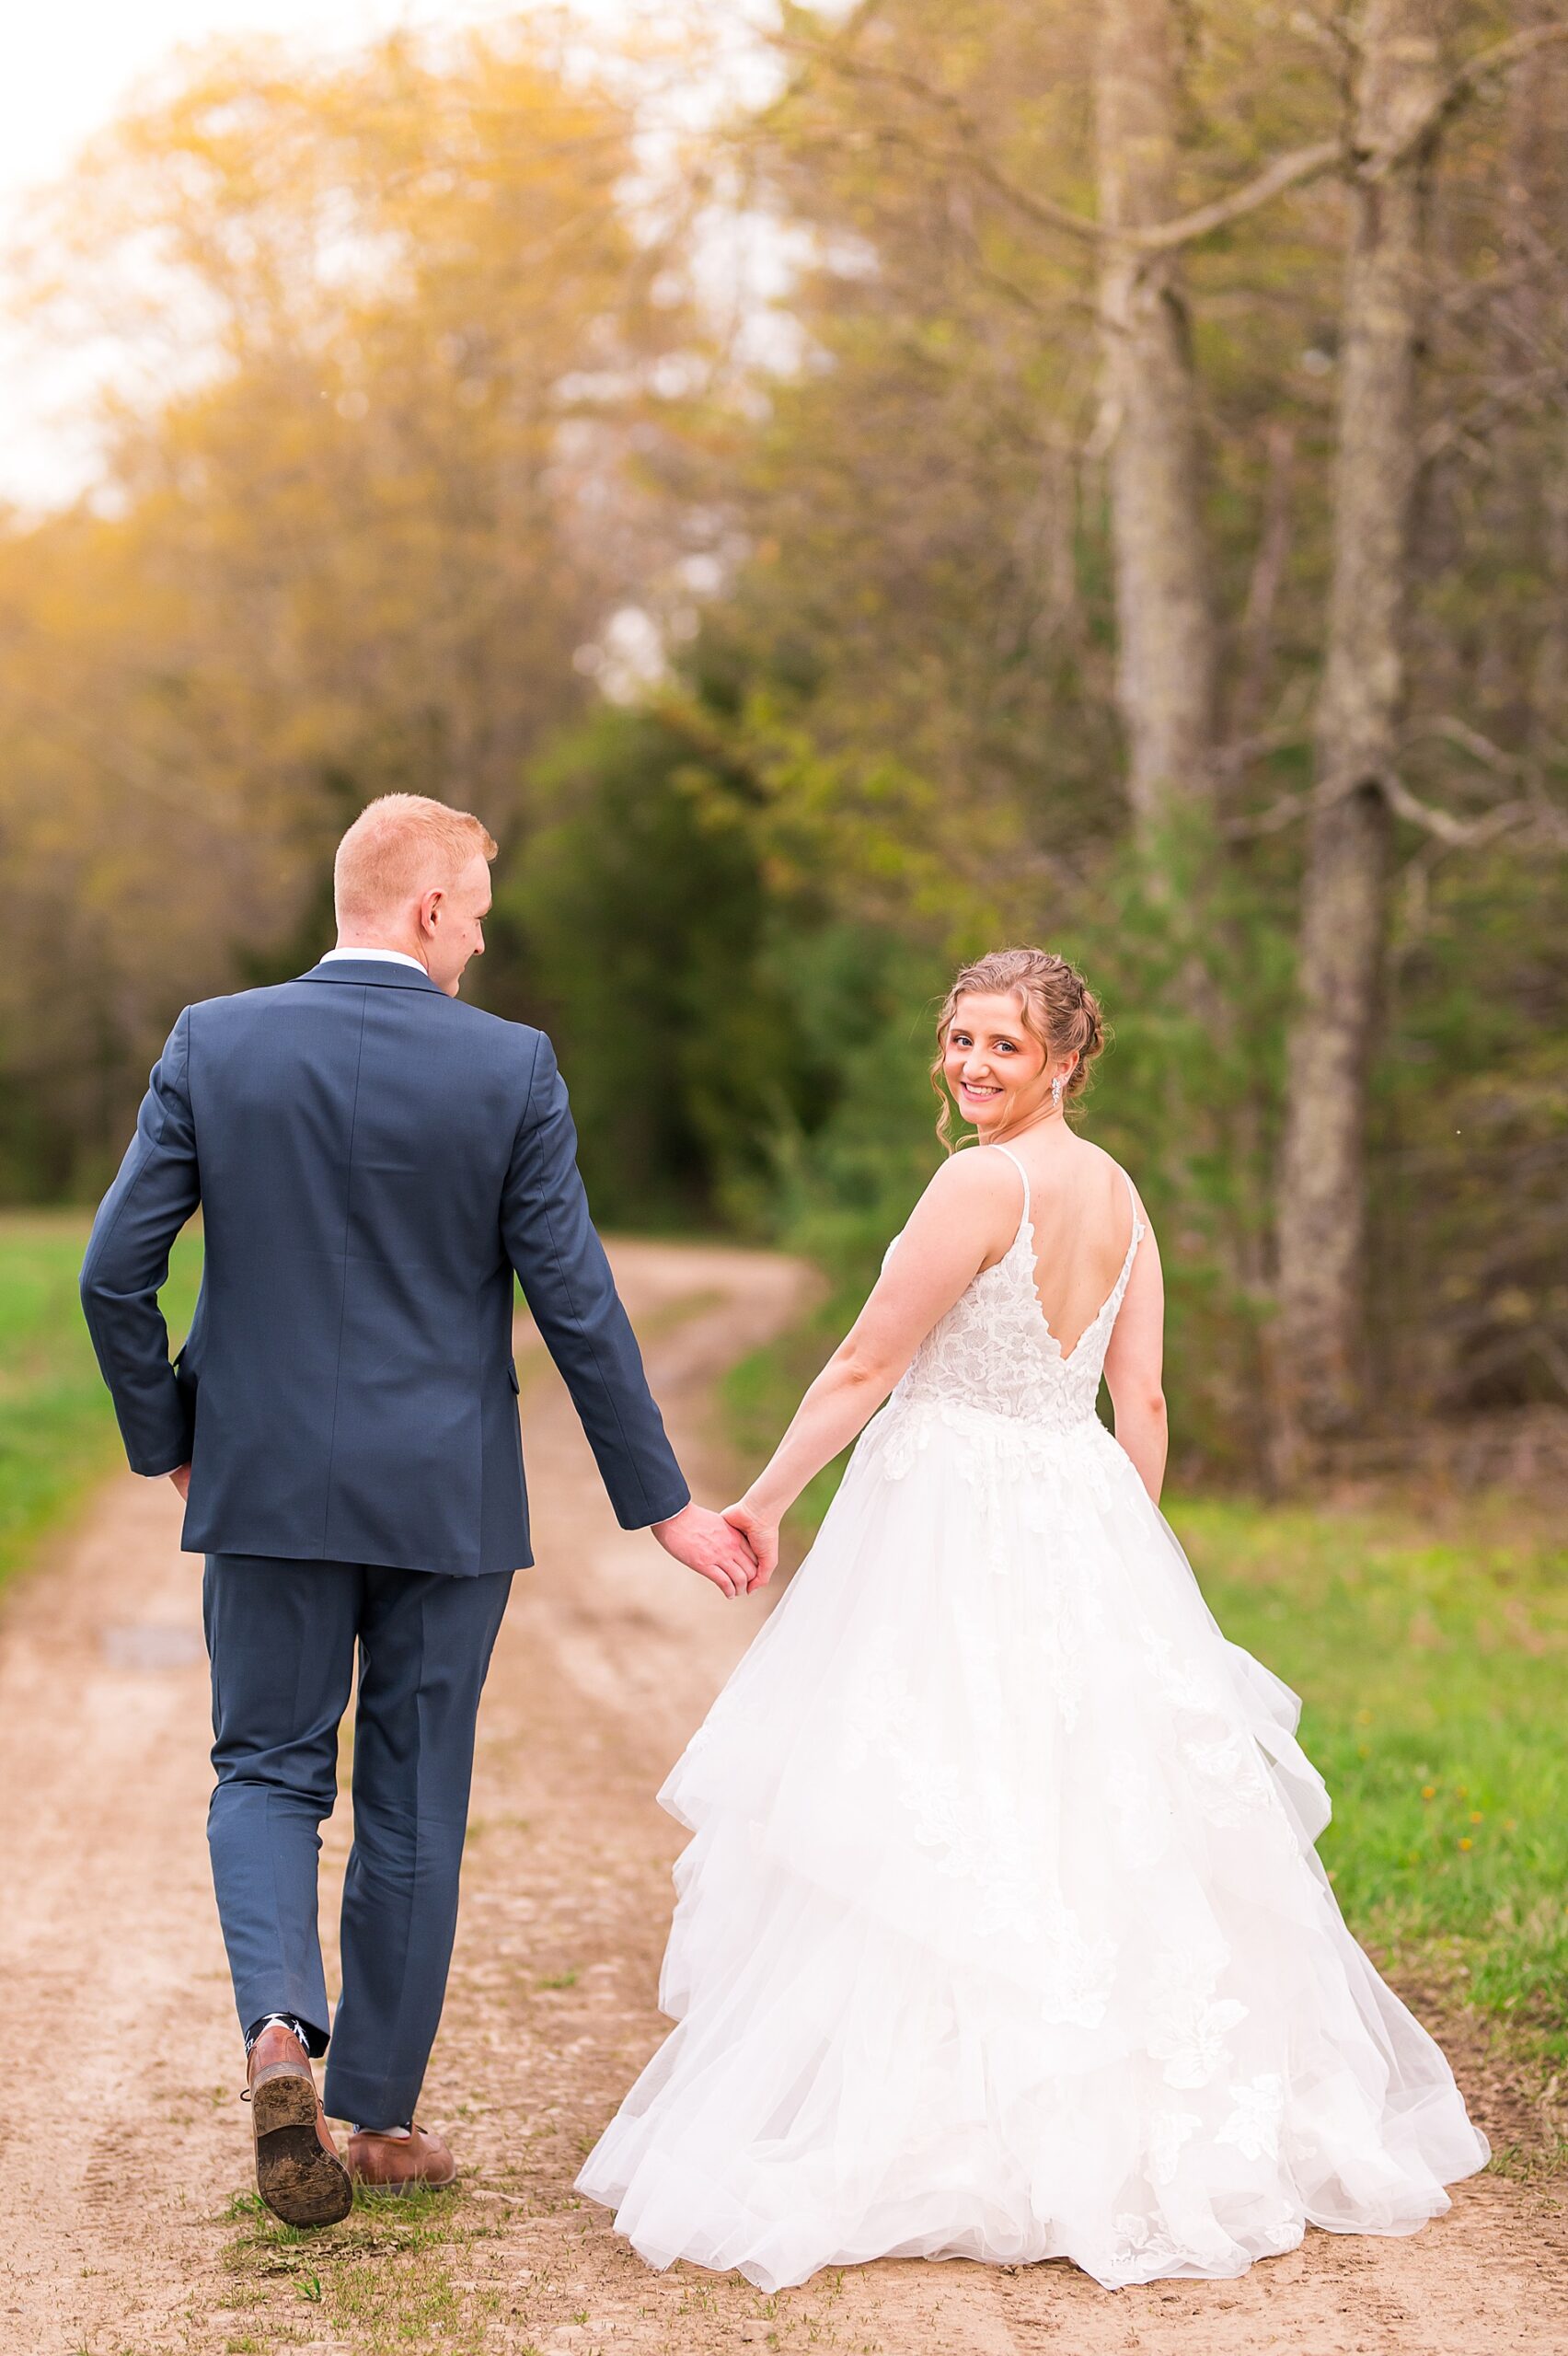 newlyweds walk together hand in hand 